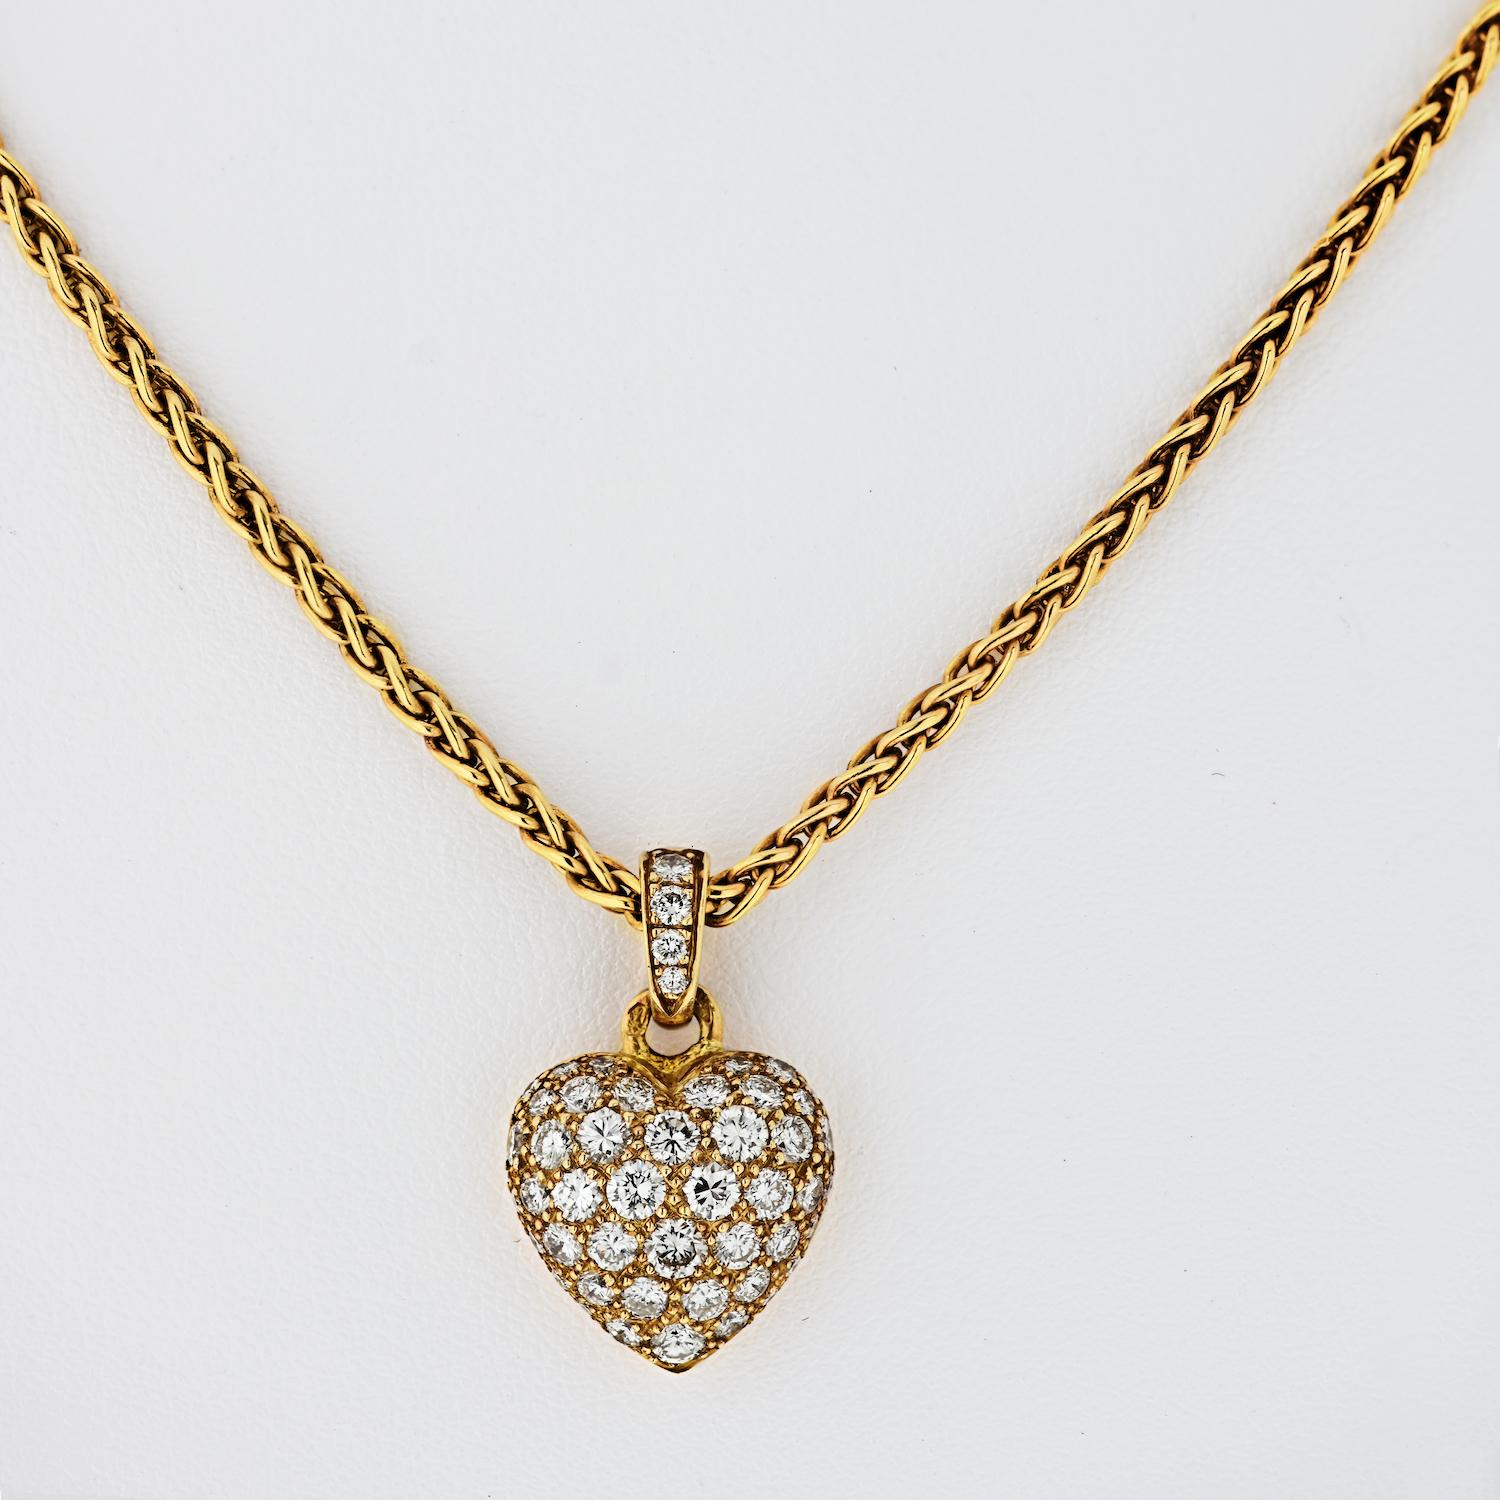 Women's Cartier Rose Gold Pave Diamond Heart Pendant on a Chain Necklace